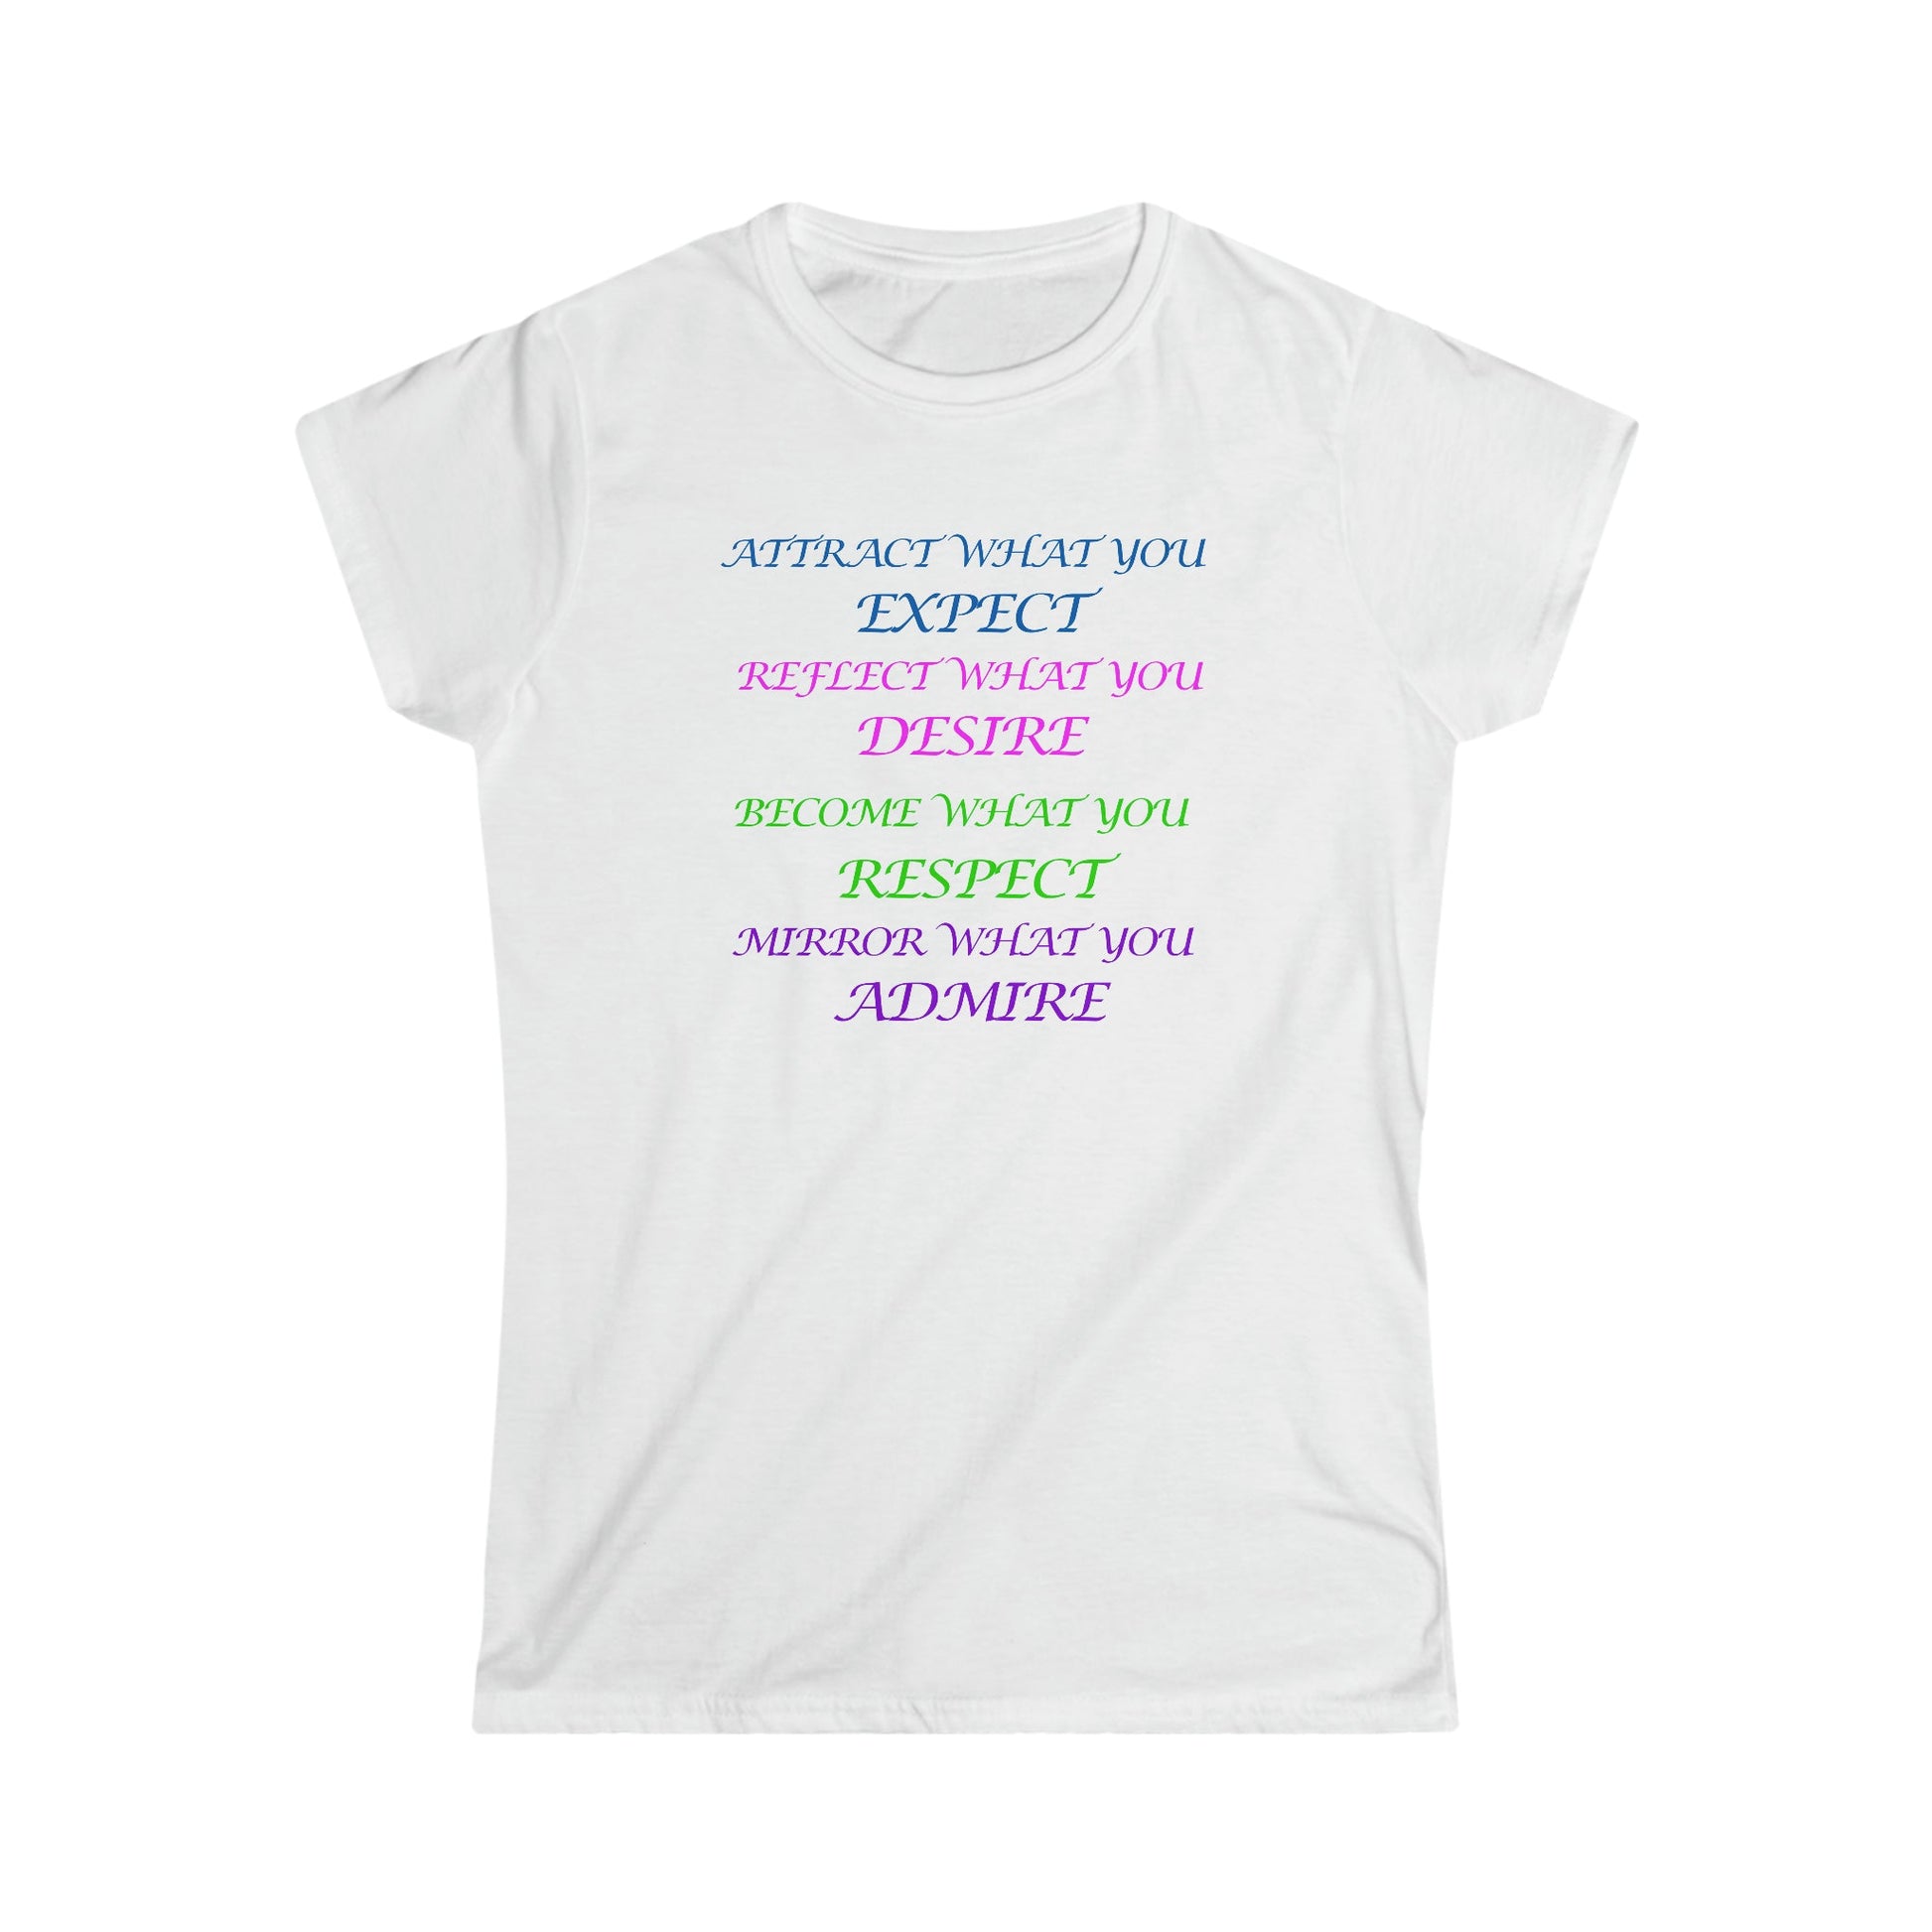 CrazyYetiClothing, CYC, Expect, Desire, Respect, Admire (Multicolor)- Women's Softstyle Tee, T-Shirt